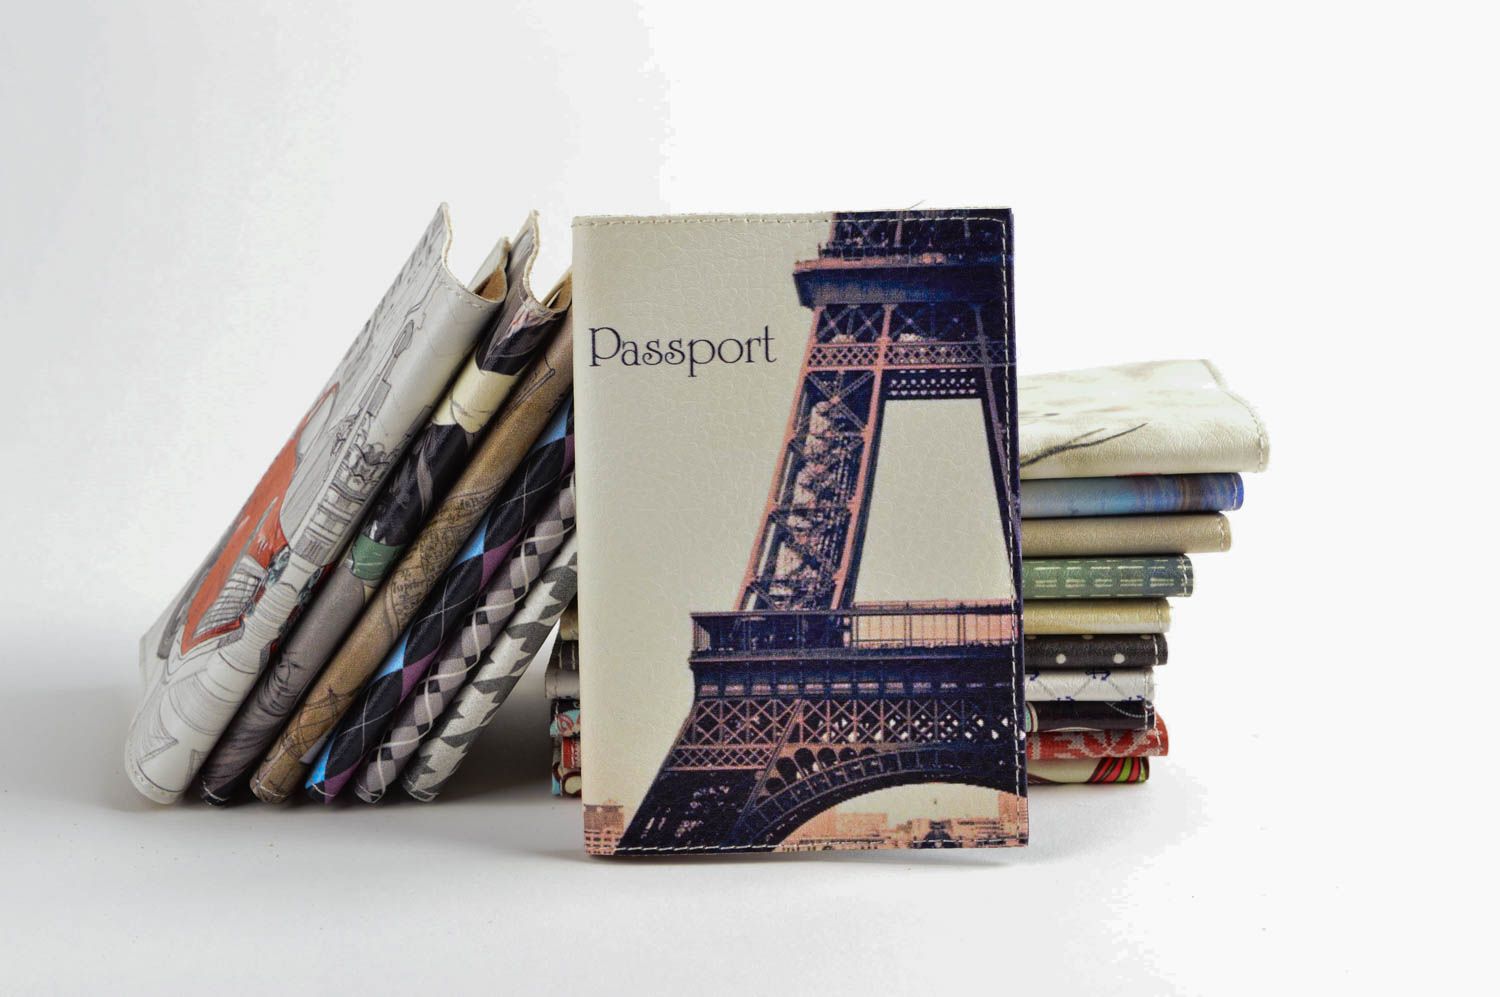 Handmade leather passport cover fashion accessories leather goods birthday gifts photo 1